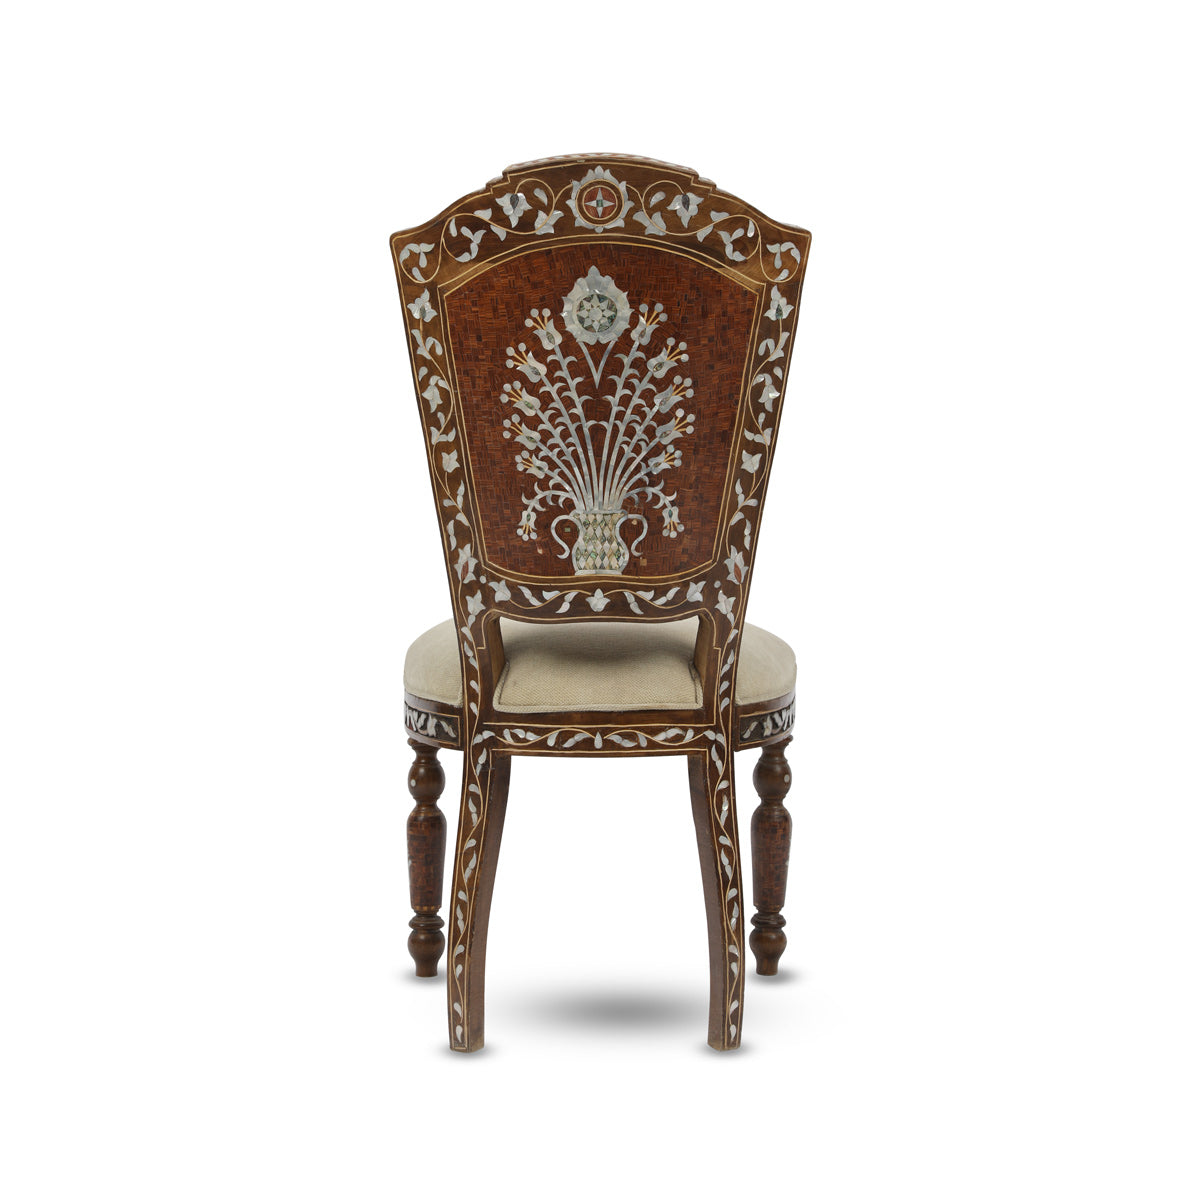 Back View of Mother of Pearl Inlaid Arabian Flat Back Chair